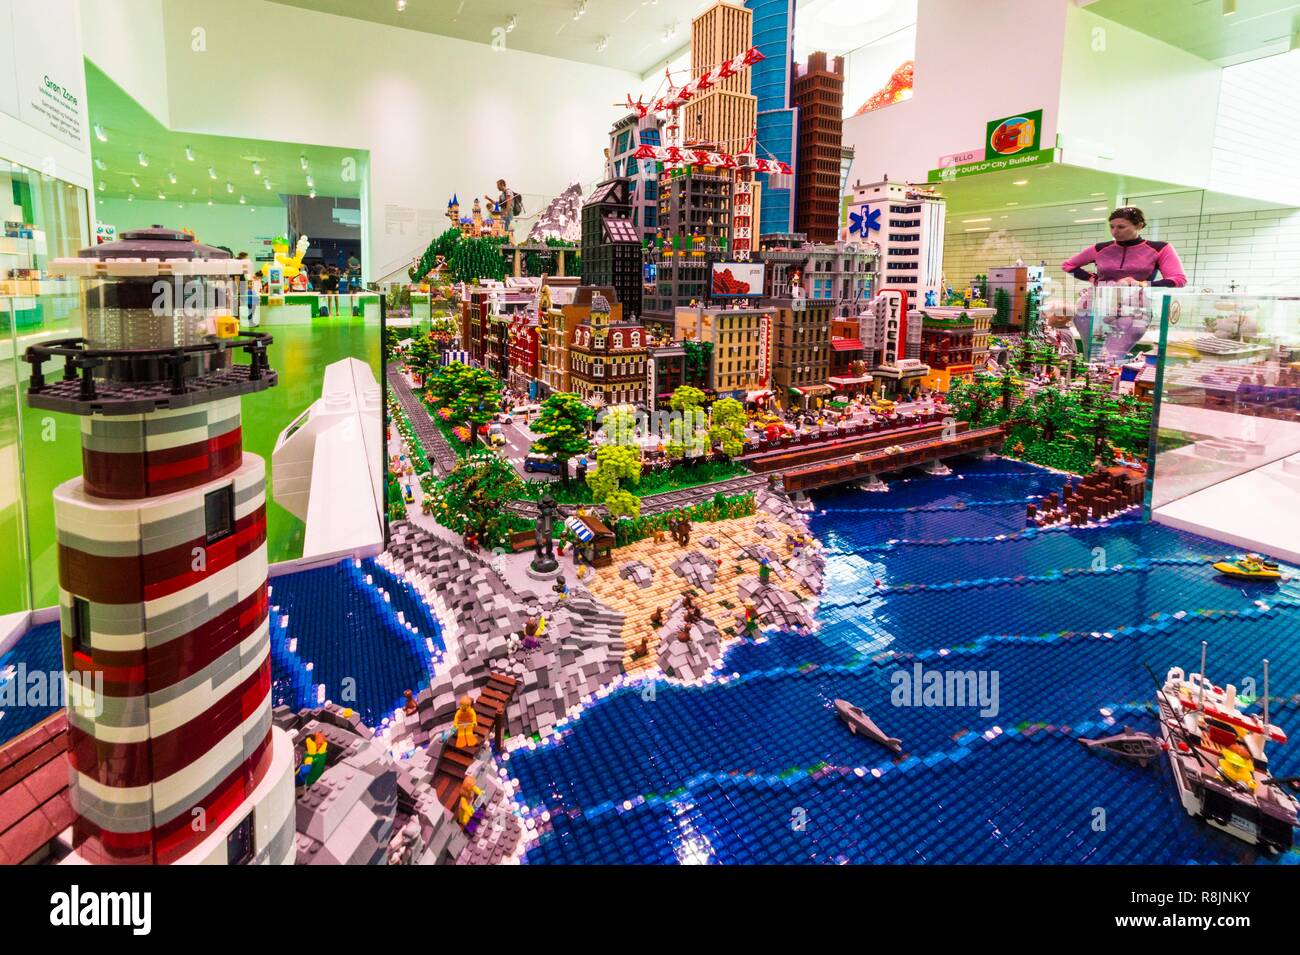 Denmark, Lego® House is the experimental center for the general public with 25 million available over 12,000 m2 in six zones: the red zone dedicated to creative skills,